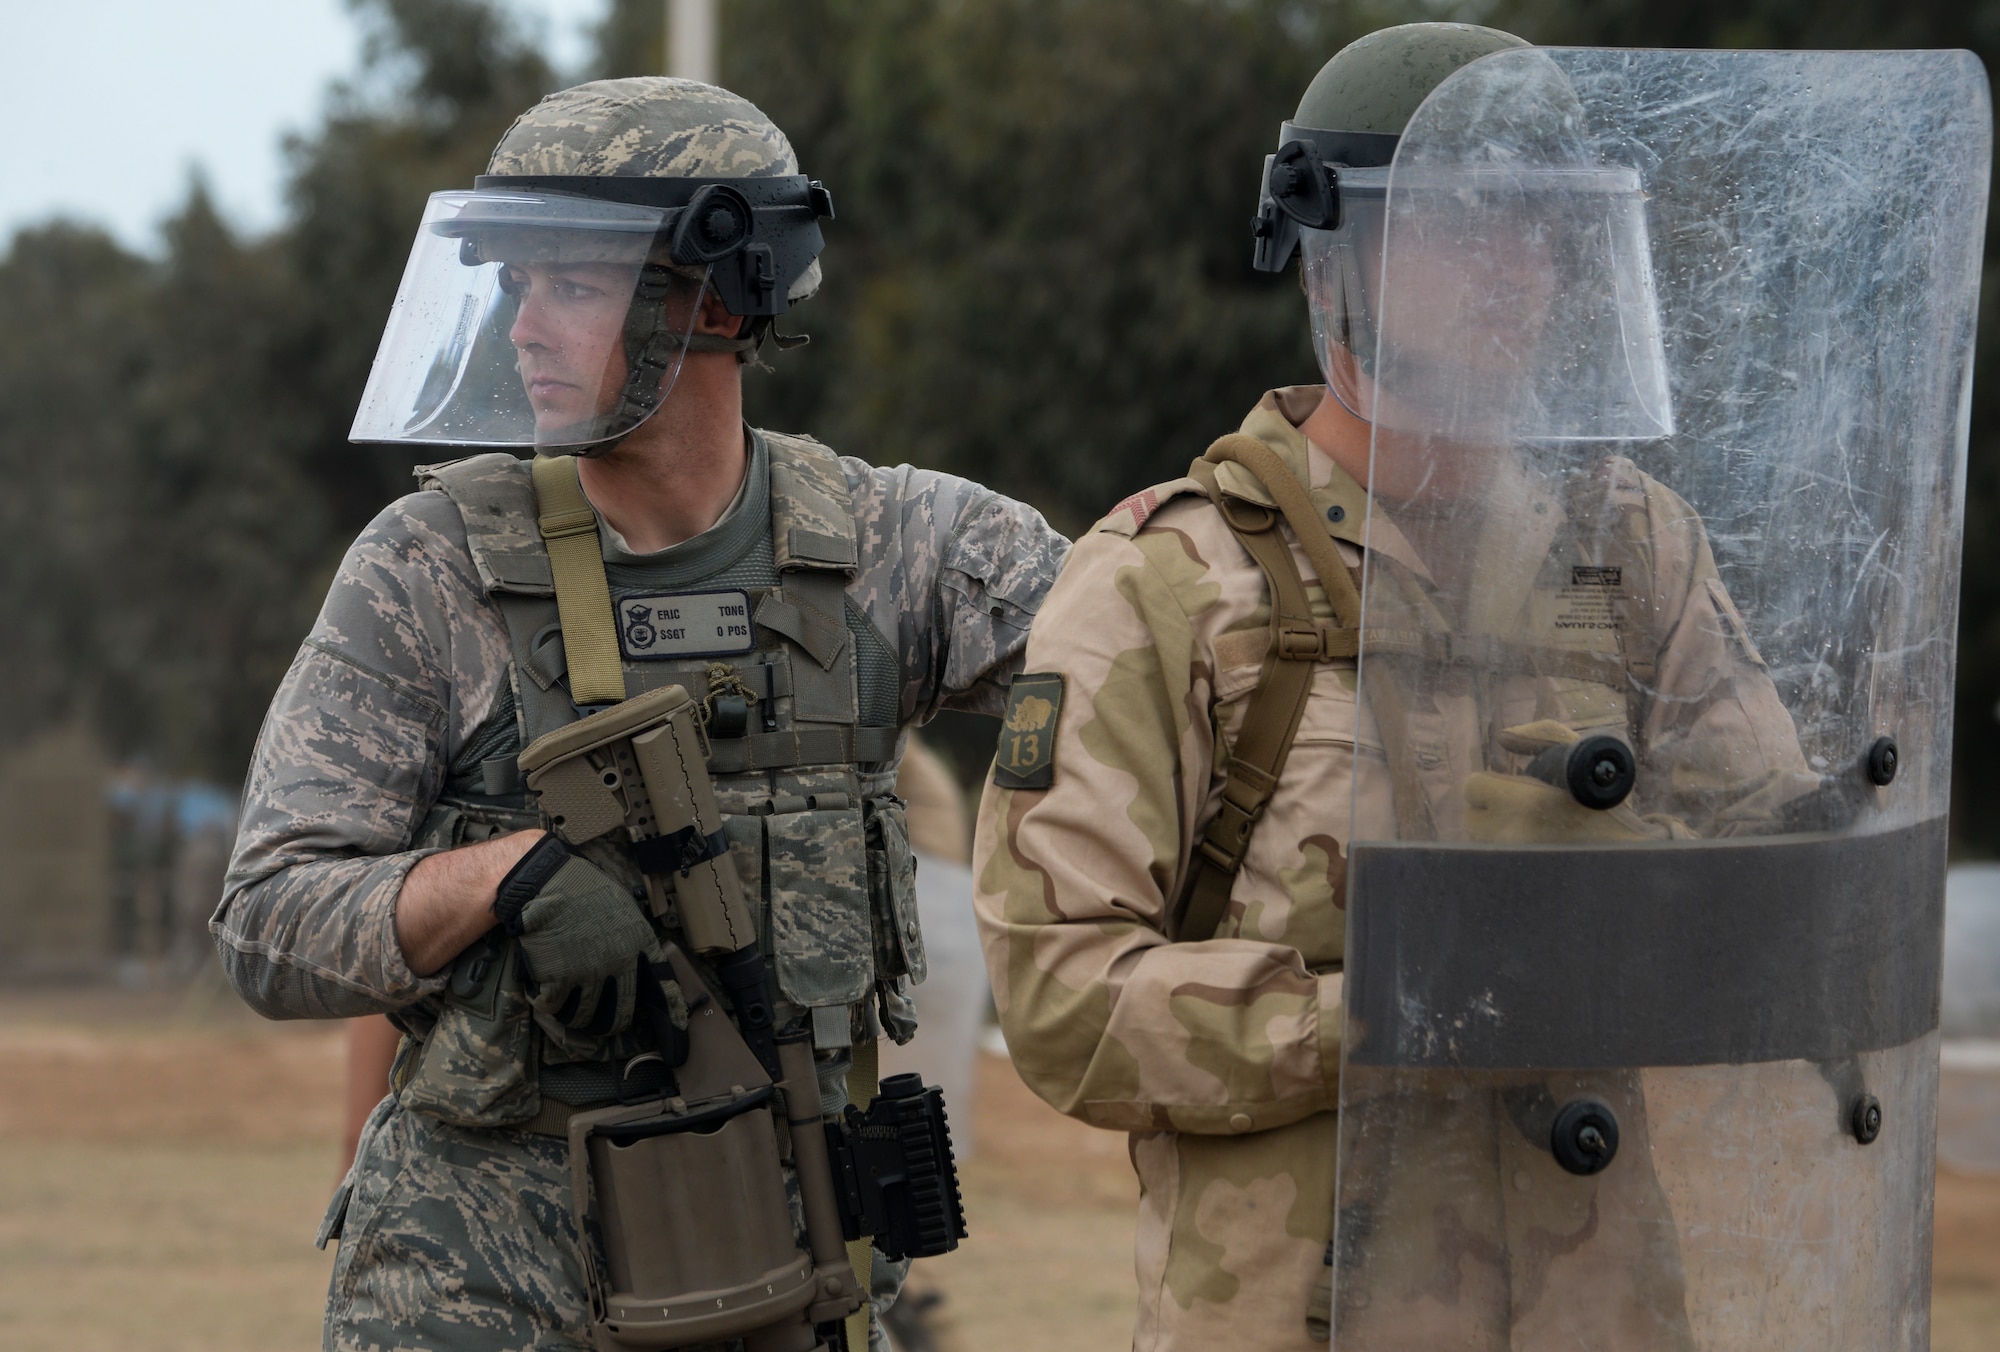 U.S. Air Force Staff Sgt. Eric Tong, 349th Security Forces Squadron fire team leader, and a Royal Netherlands army soldier participate in a peace support operations demonstration during AFRICAN LION 16 at Tifnit, Kingdom of Morocco, April 26, 2016. The exercise provided familiarization with various military techniques from 11 different countries and provided an opportunity to become more familiar with allied nations’ tactics to ease synchronization in the future. (U.S. Air Force photo by Senior Airman Krystal Ardrey/Released)